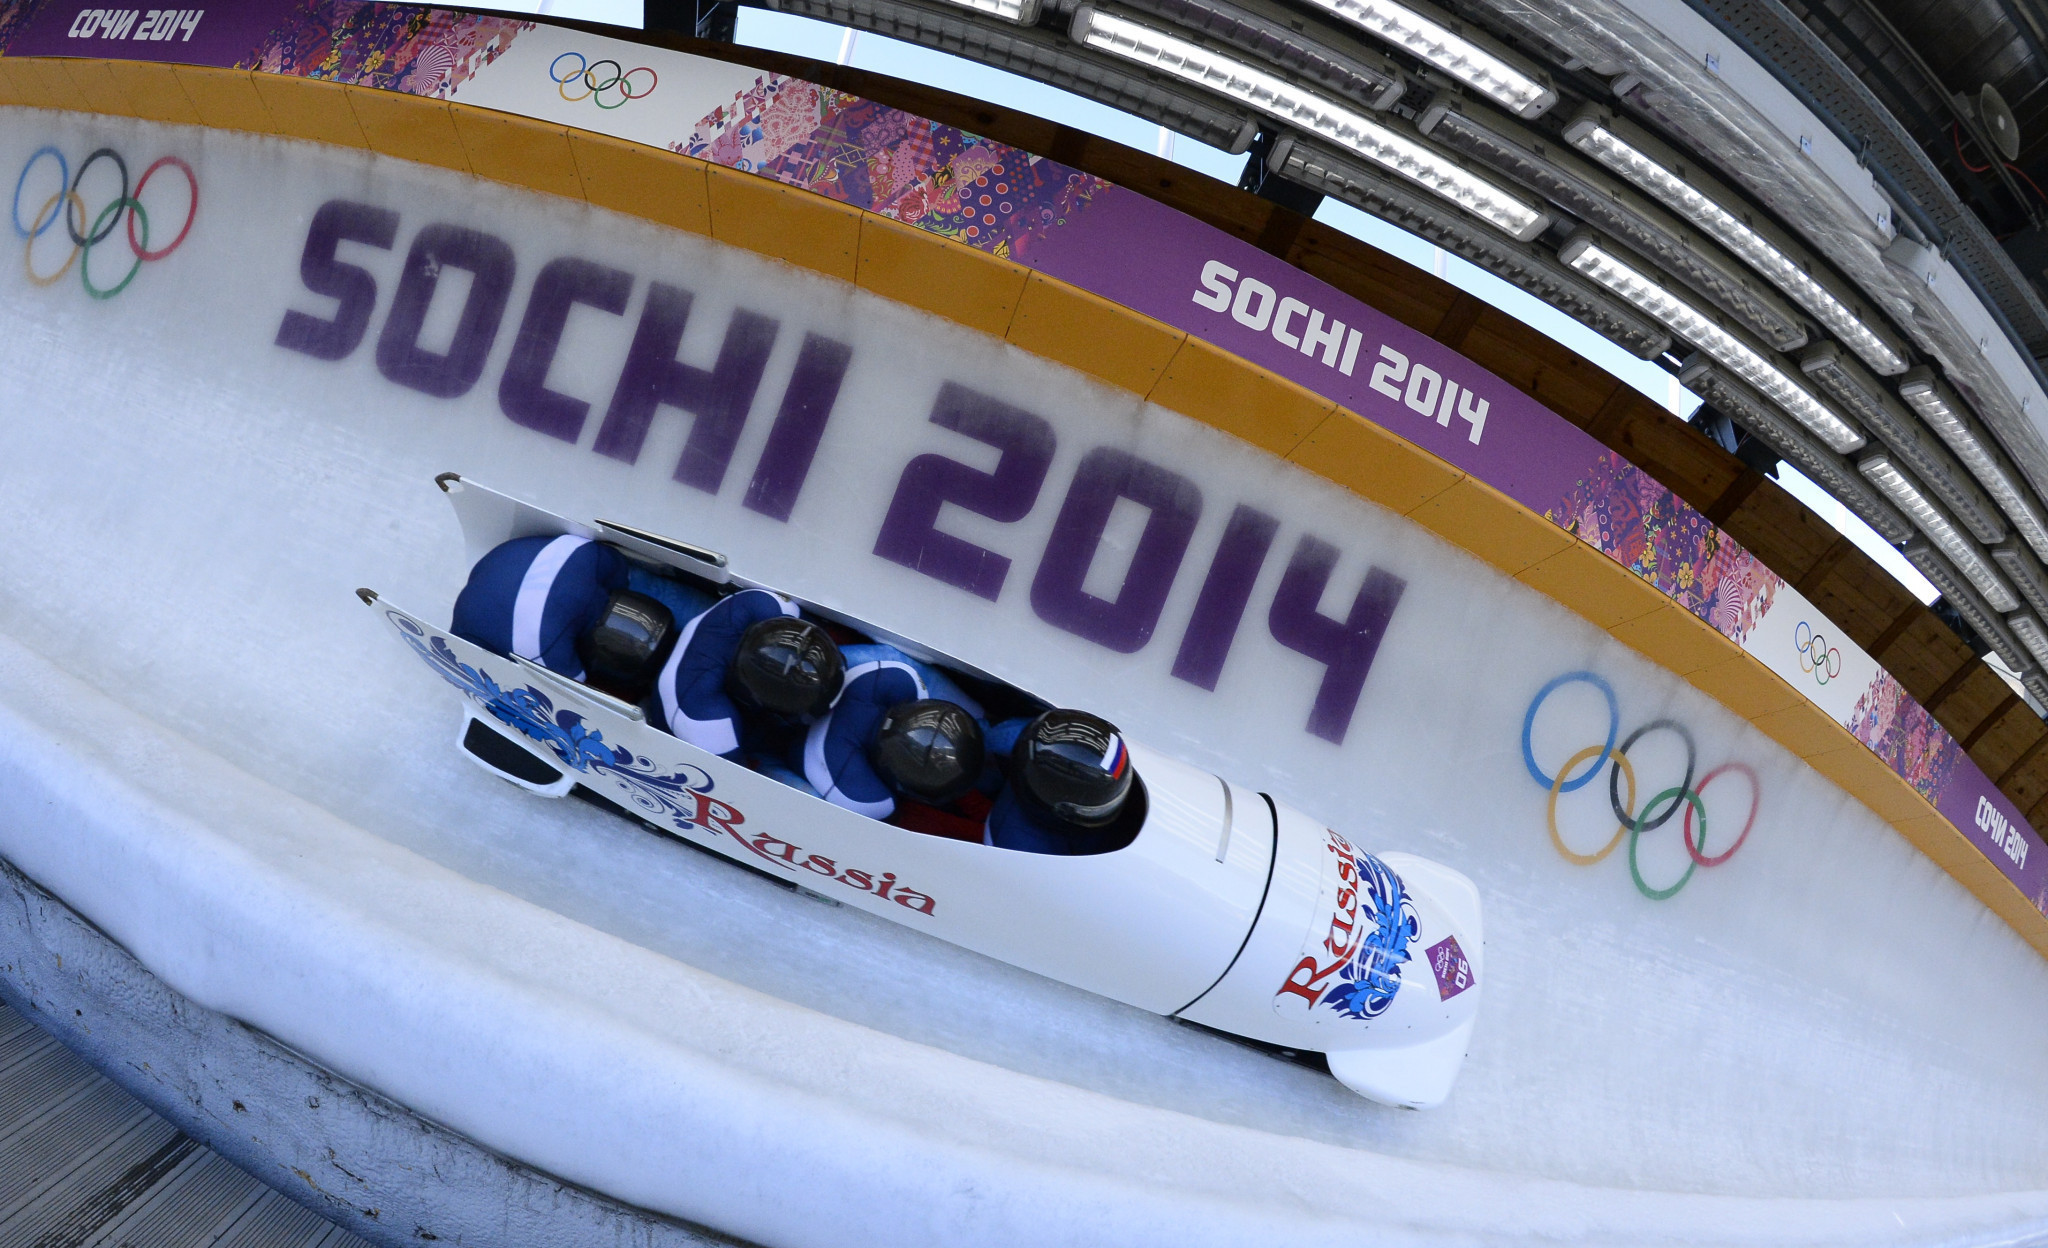 The IOC reports more a than six-fold increase in anti-doping and medical expenditure for Tokyo2020 and Pyeongchang 2018 versus Rio 2016 and Sochi 2014 ©Getty Images